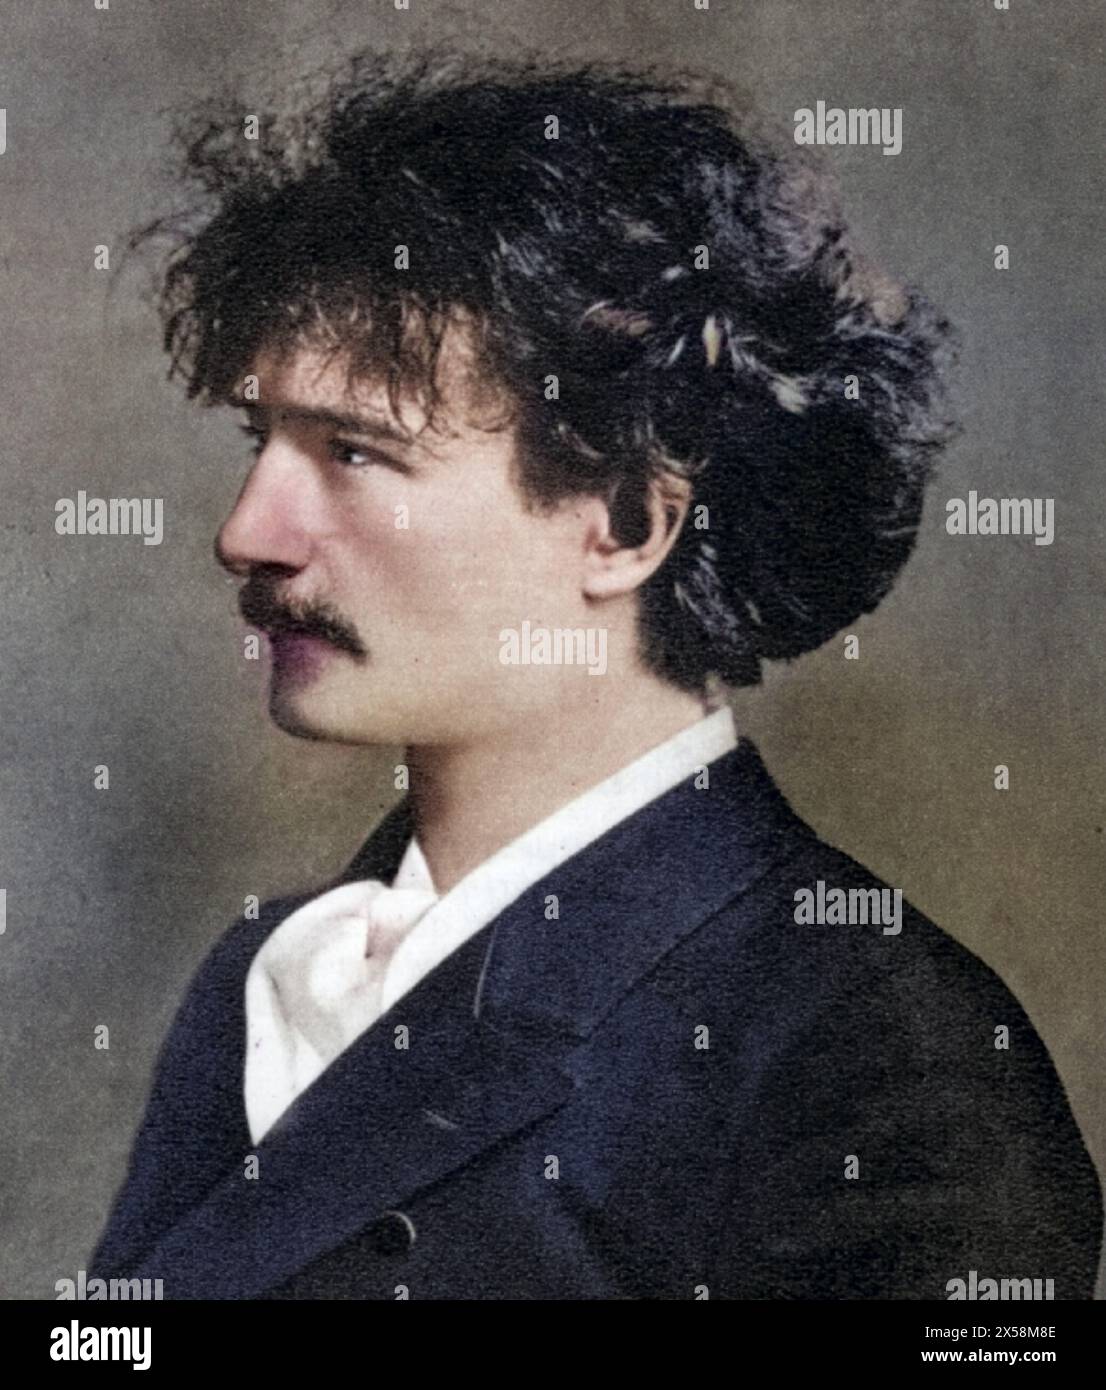 Paderewski, Ignacy Jan, 18.11.1860 - 29.6.1941, Polish pianist, composer, portrait, ADDITIONAL-RIGHTS-CLEARANCE-INFO-NOT-AVAILABLE Stock Photo